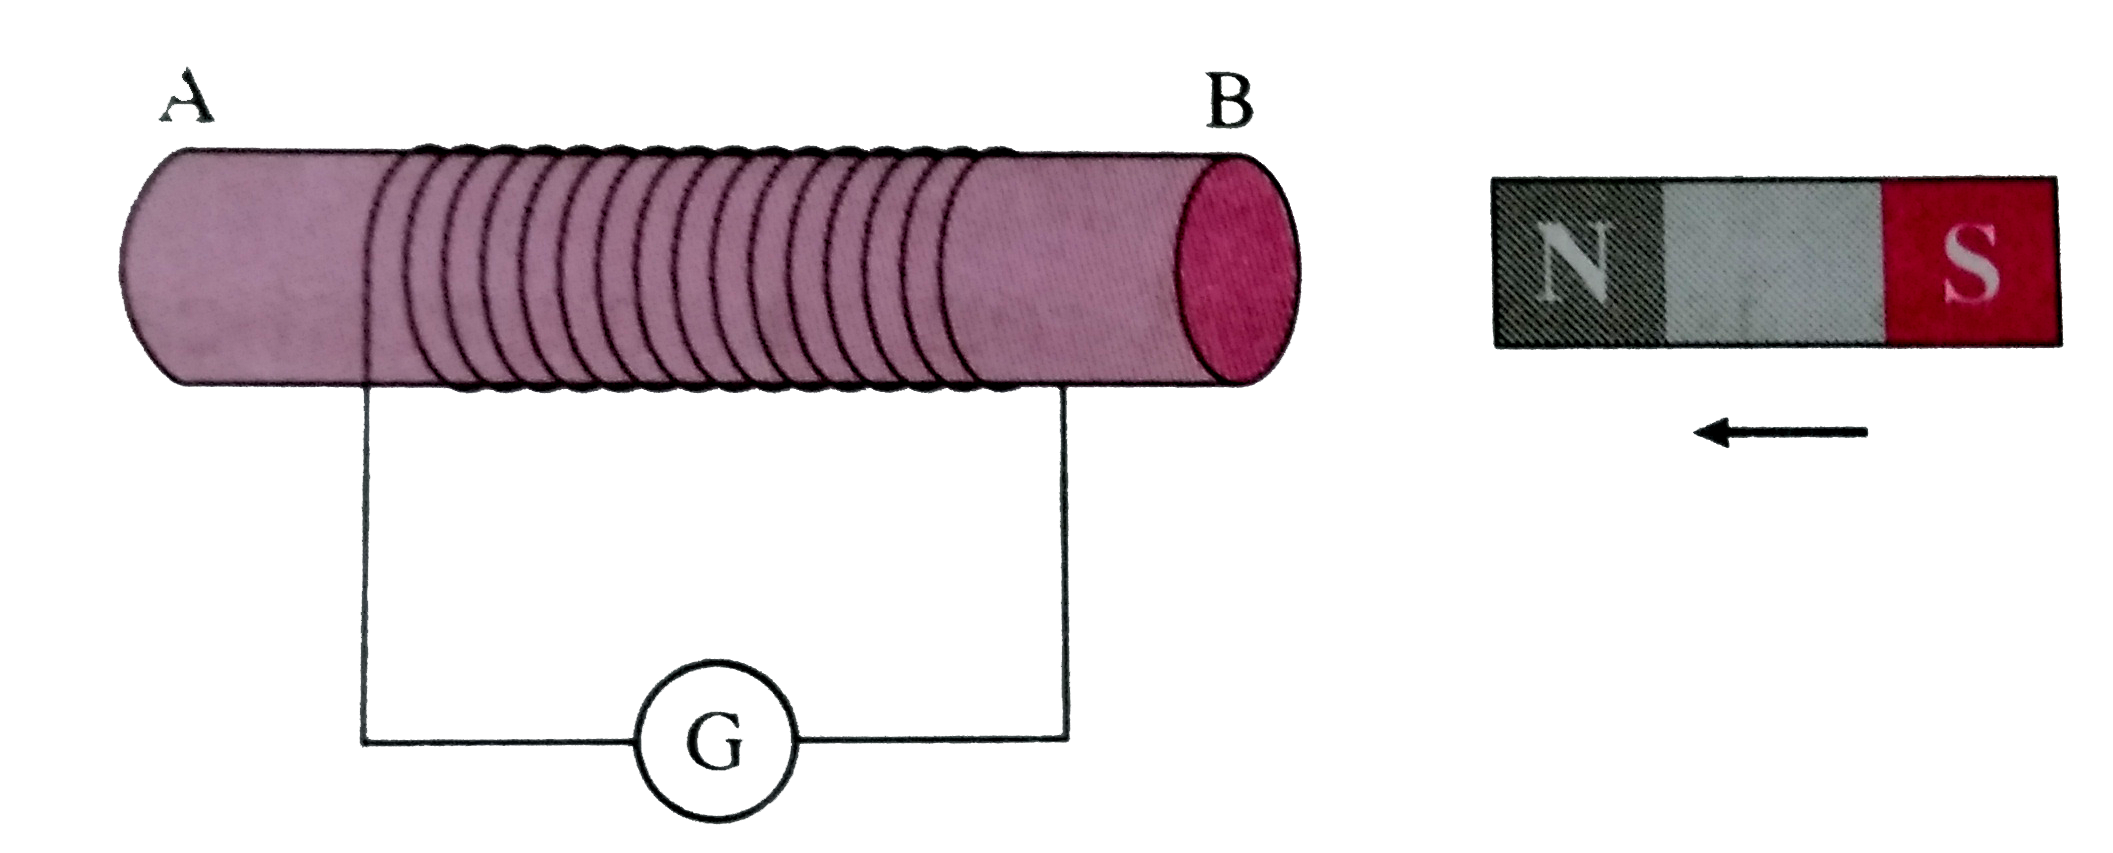 Take a coil AB having 10-15 turns. Connect the two ends of the coil to the galvanometer as shown in Fig.  Take a strong bar magnet. (1) Move the north pole of the magnet towards the end B of the coil Observe the deflection of the pointer in the galvanometer. Note the direction of the deflection (i.e. right or left). (2) Now repeat this with the south pole of the magnet towards the end B of the coil. Again observe the deflection. Note its direction. (3) What will happen if instead of the magnet, the coil is moved? (4) If both the coil and the magnet are kept stationary, do you observe any deflection? (5) Compare the direction of the deflection when the north pole of the magnet is moved towards the end B of the coil with that when the end B of the coil is moved away from the north pole of the magnet. (6) What conclusions do you draw from the observations?